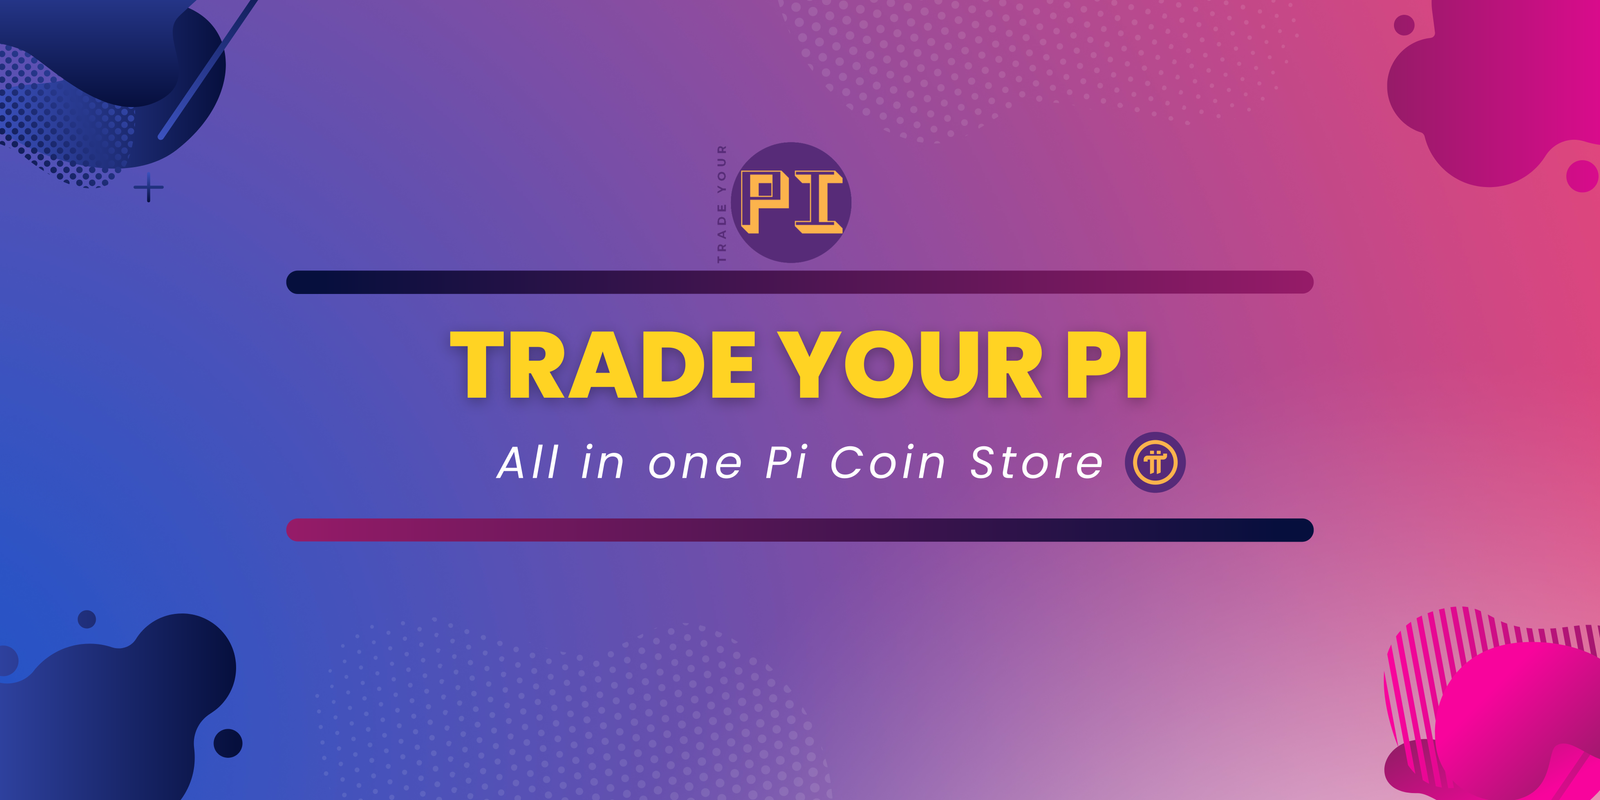 TradeYourPi: All in One Pi Coin Store for Online Trading